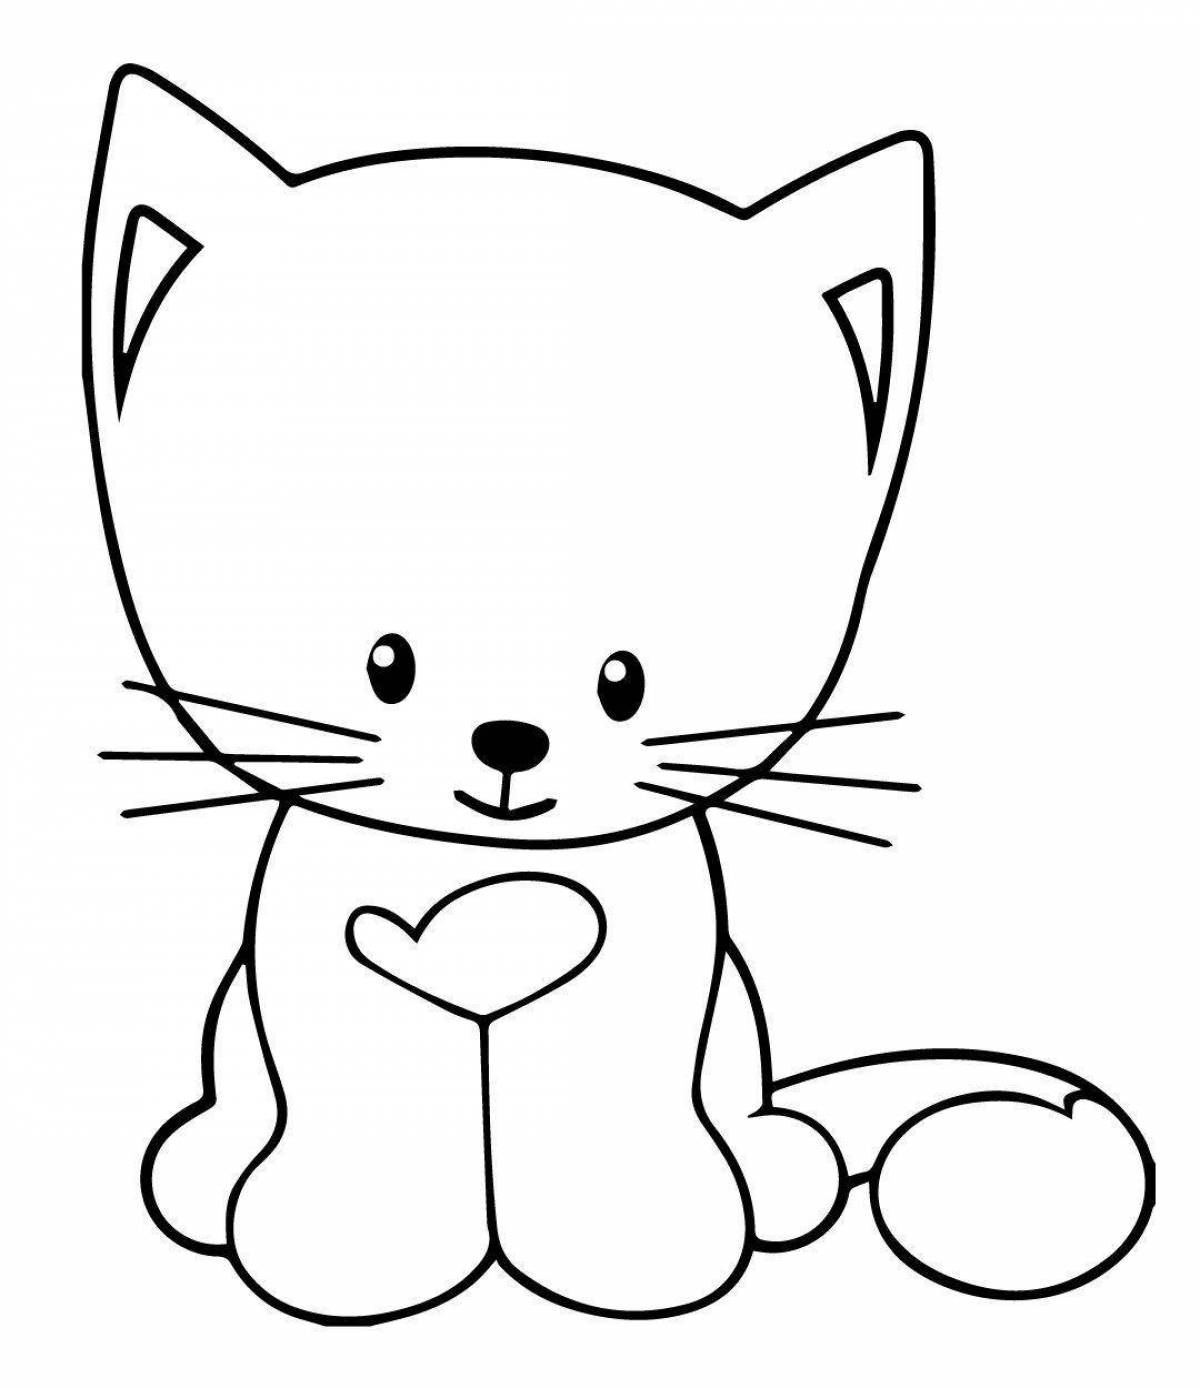 Fun drawing of a kitten for kids